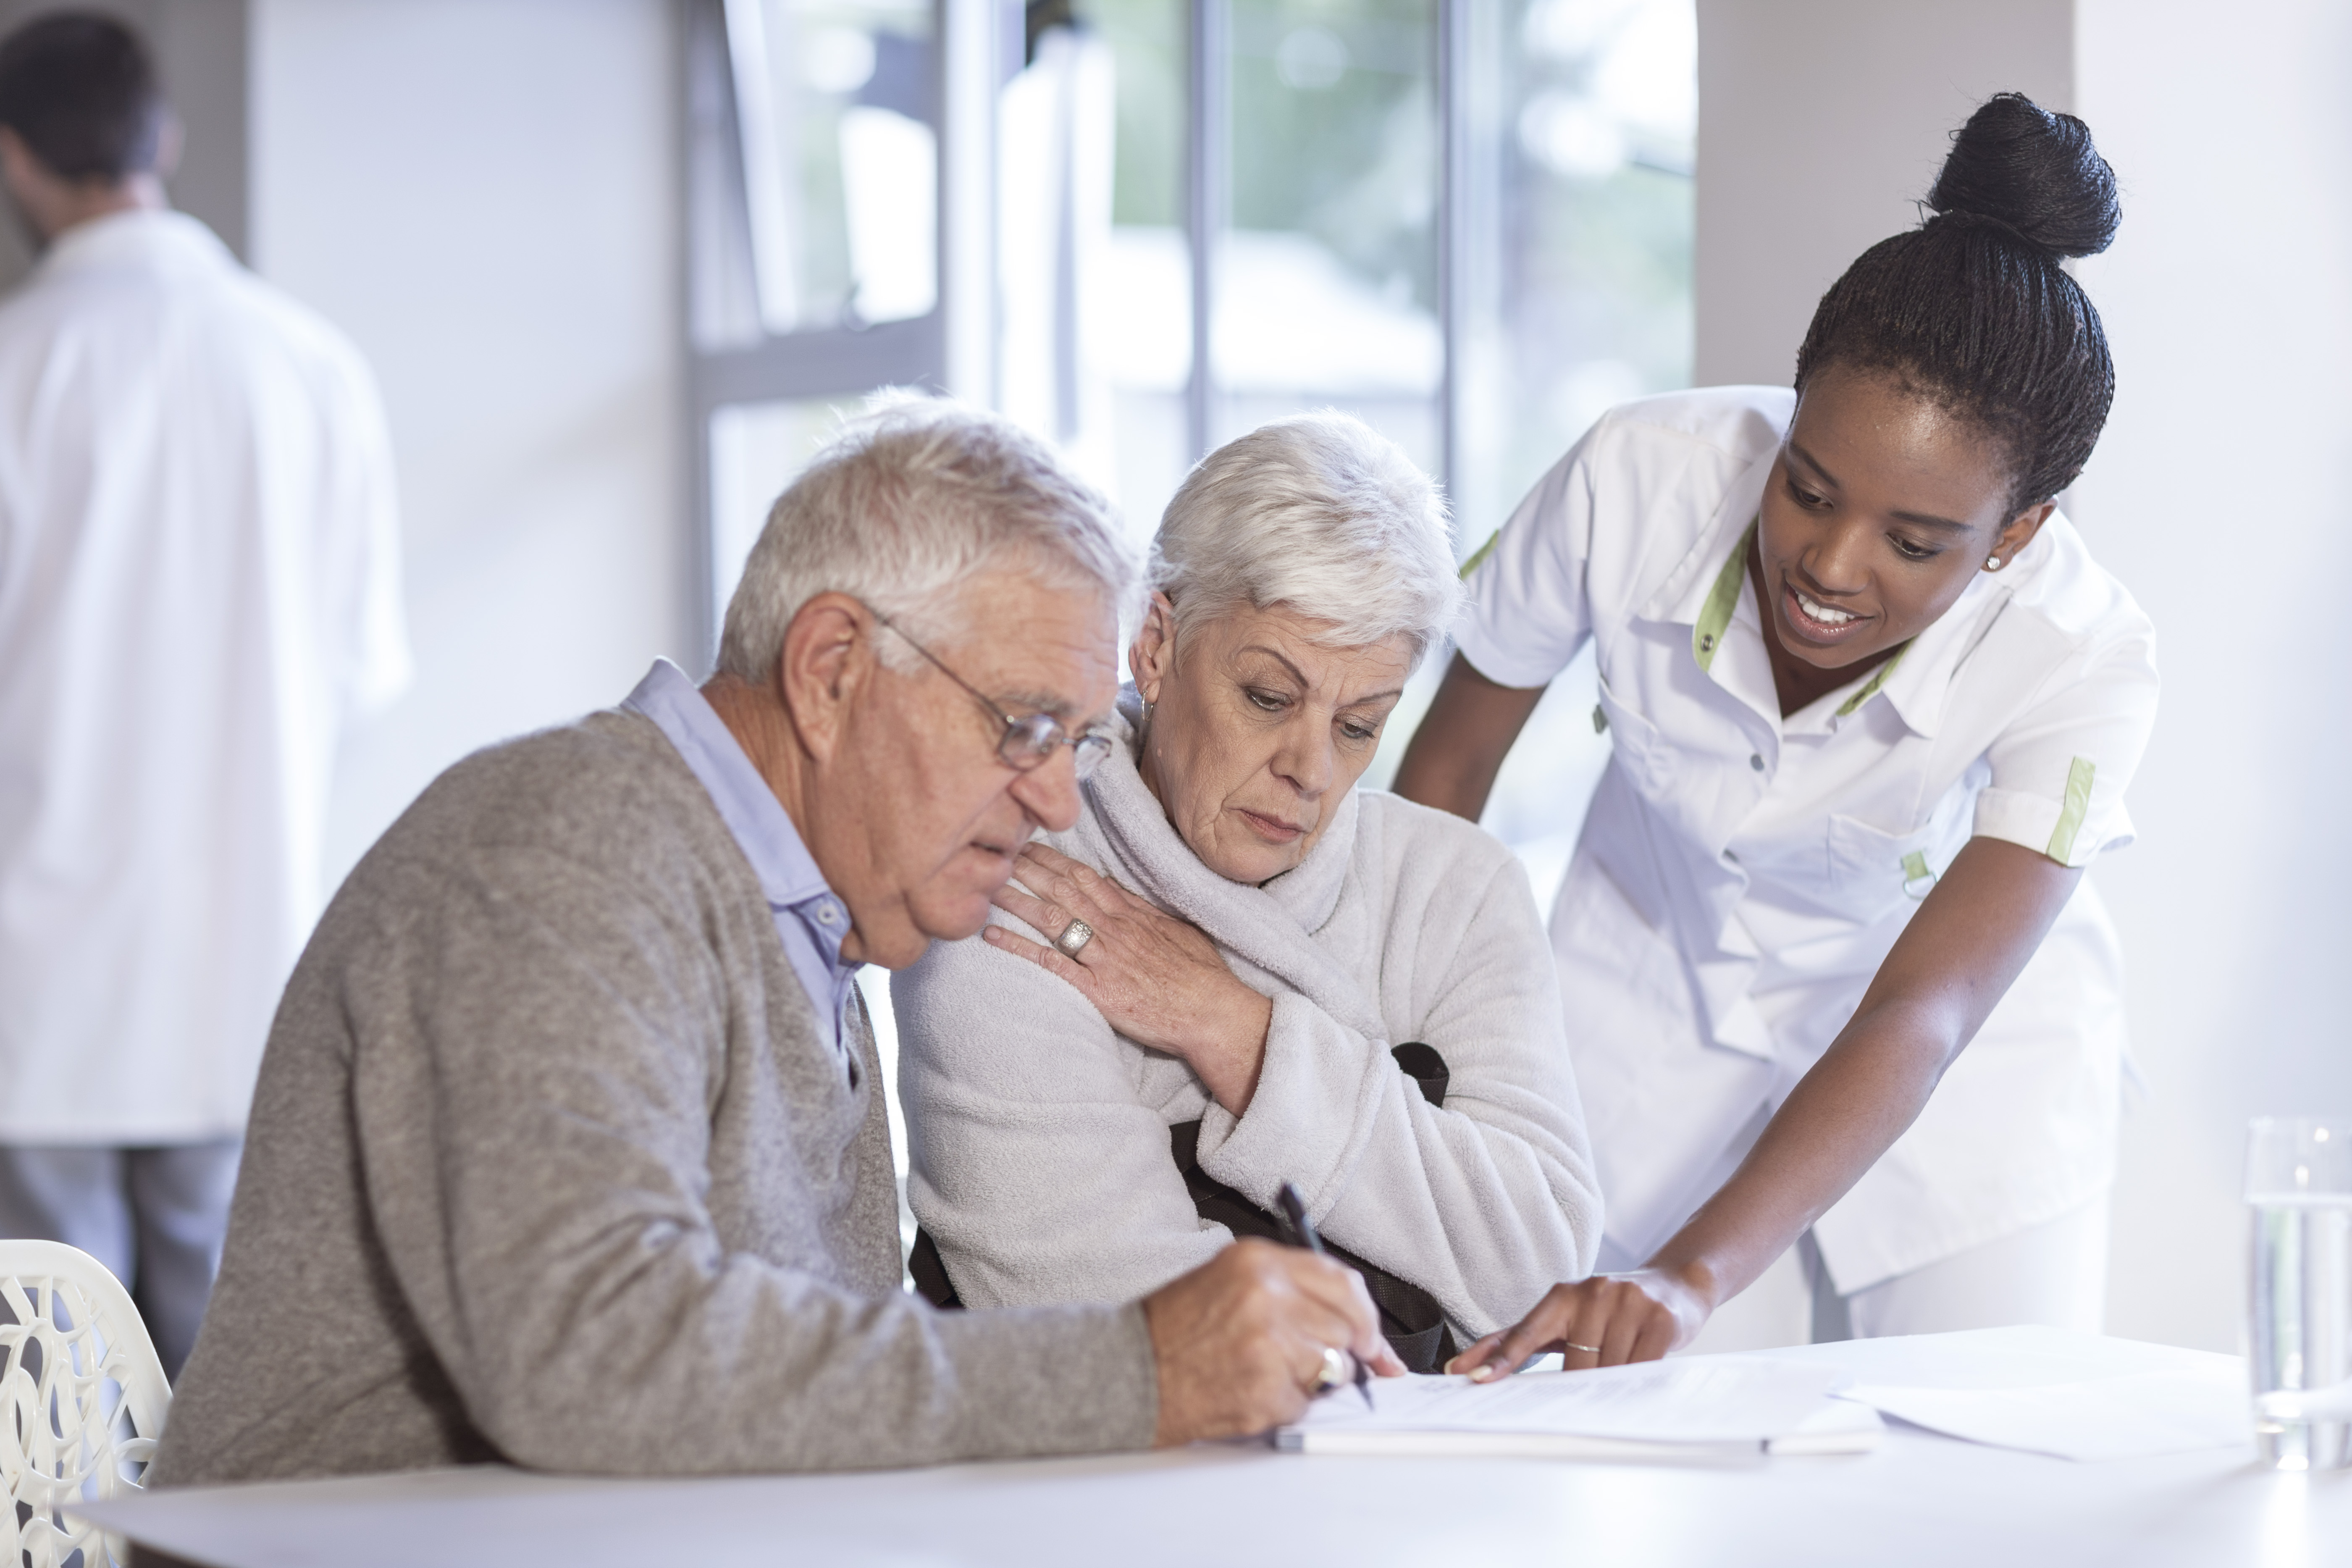 9 Best Practices for Touring a Senior Living Community